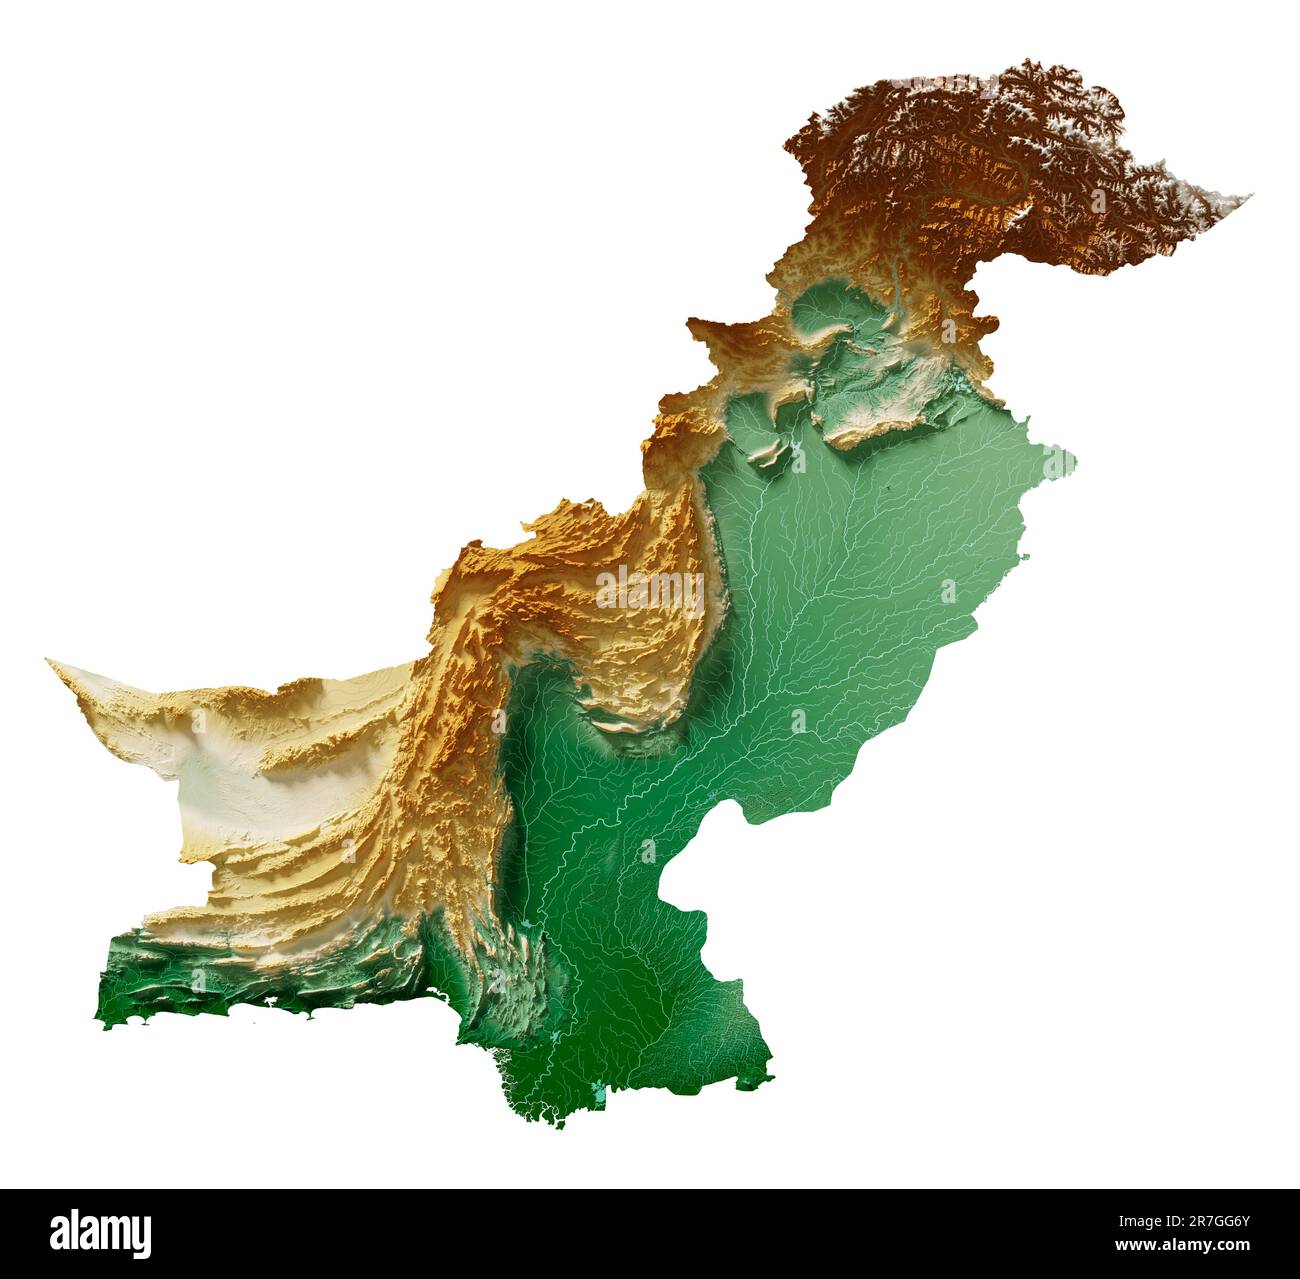 Pakistan. Detailed 3D rendering of a shaded relief map with rivers and lakes. Colored by elevation. White background. Created with satellite data. Stock Photo